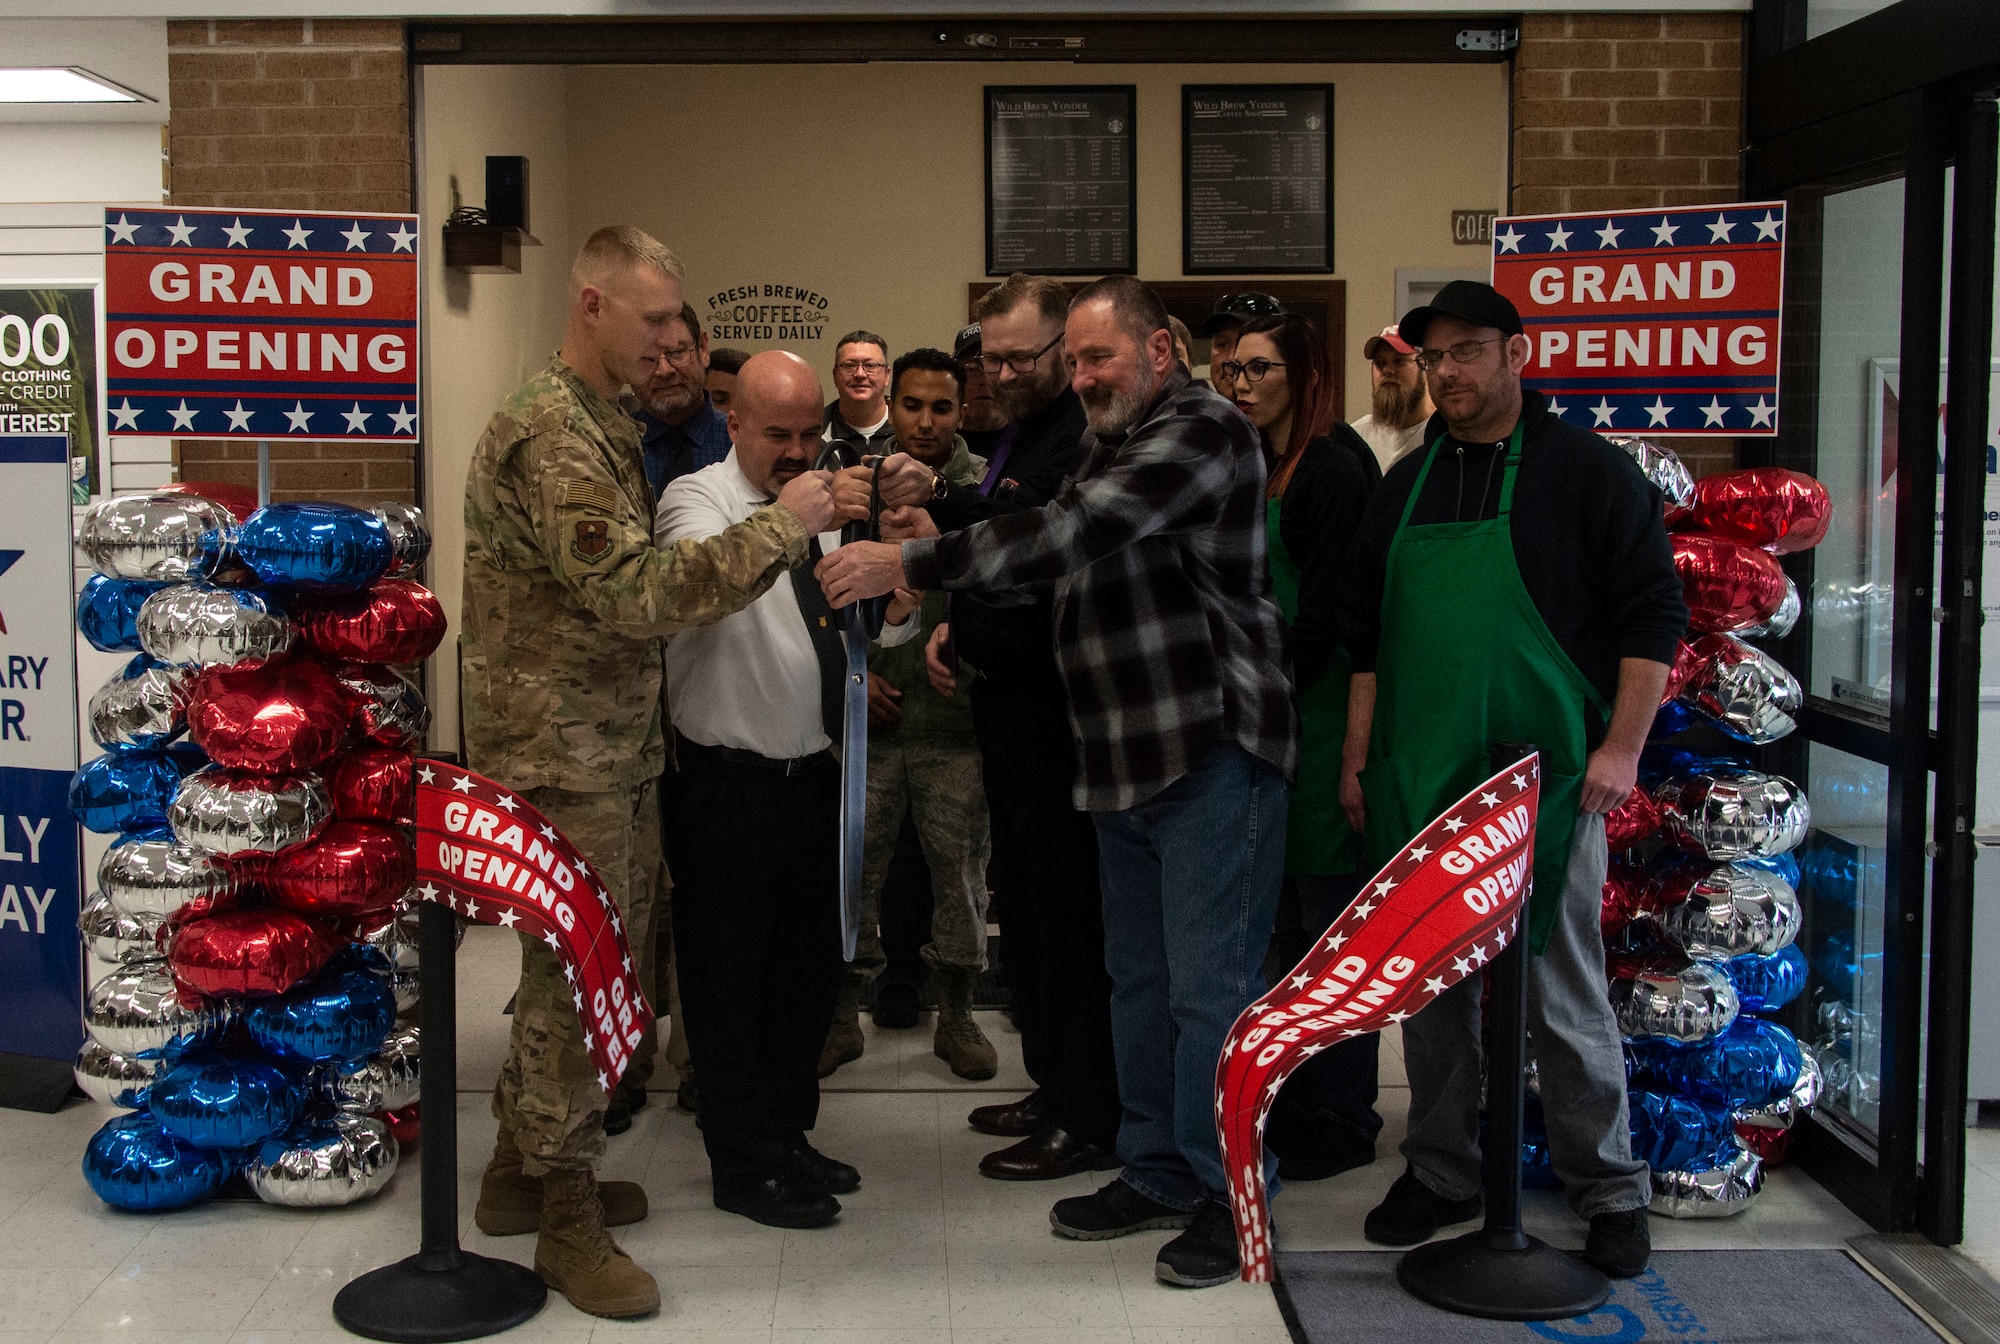 Members of the 97th Air Mobility Wing responsible for helping build the new Wild Brew Yonder coffee shop cut the grand opening ribbon, Feb. 29, 2019 at Altus Air Force Base, Okla.